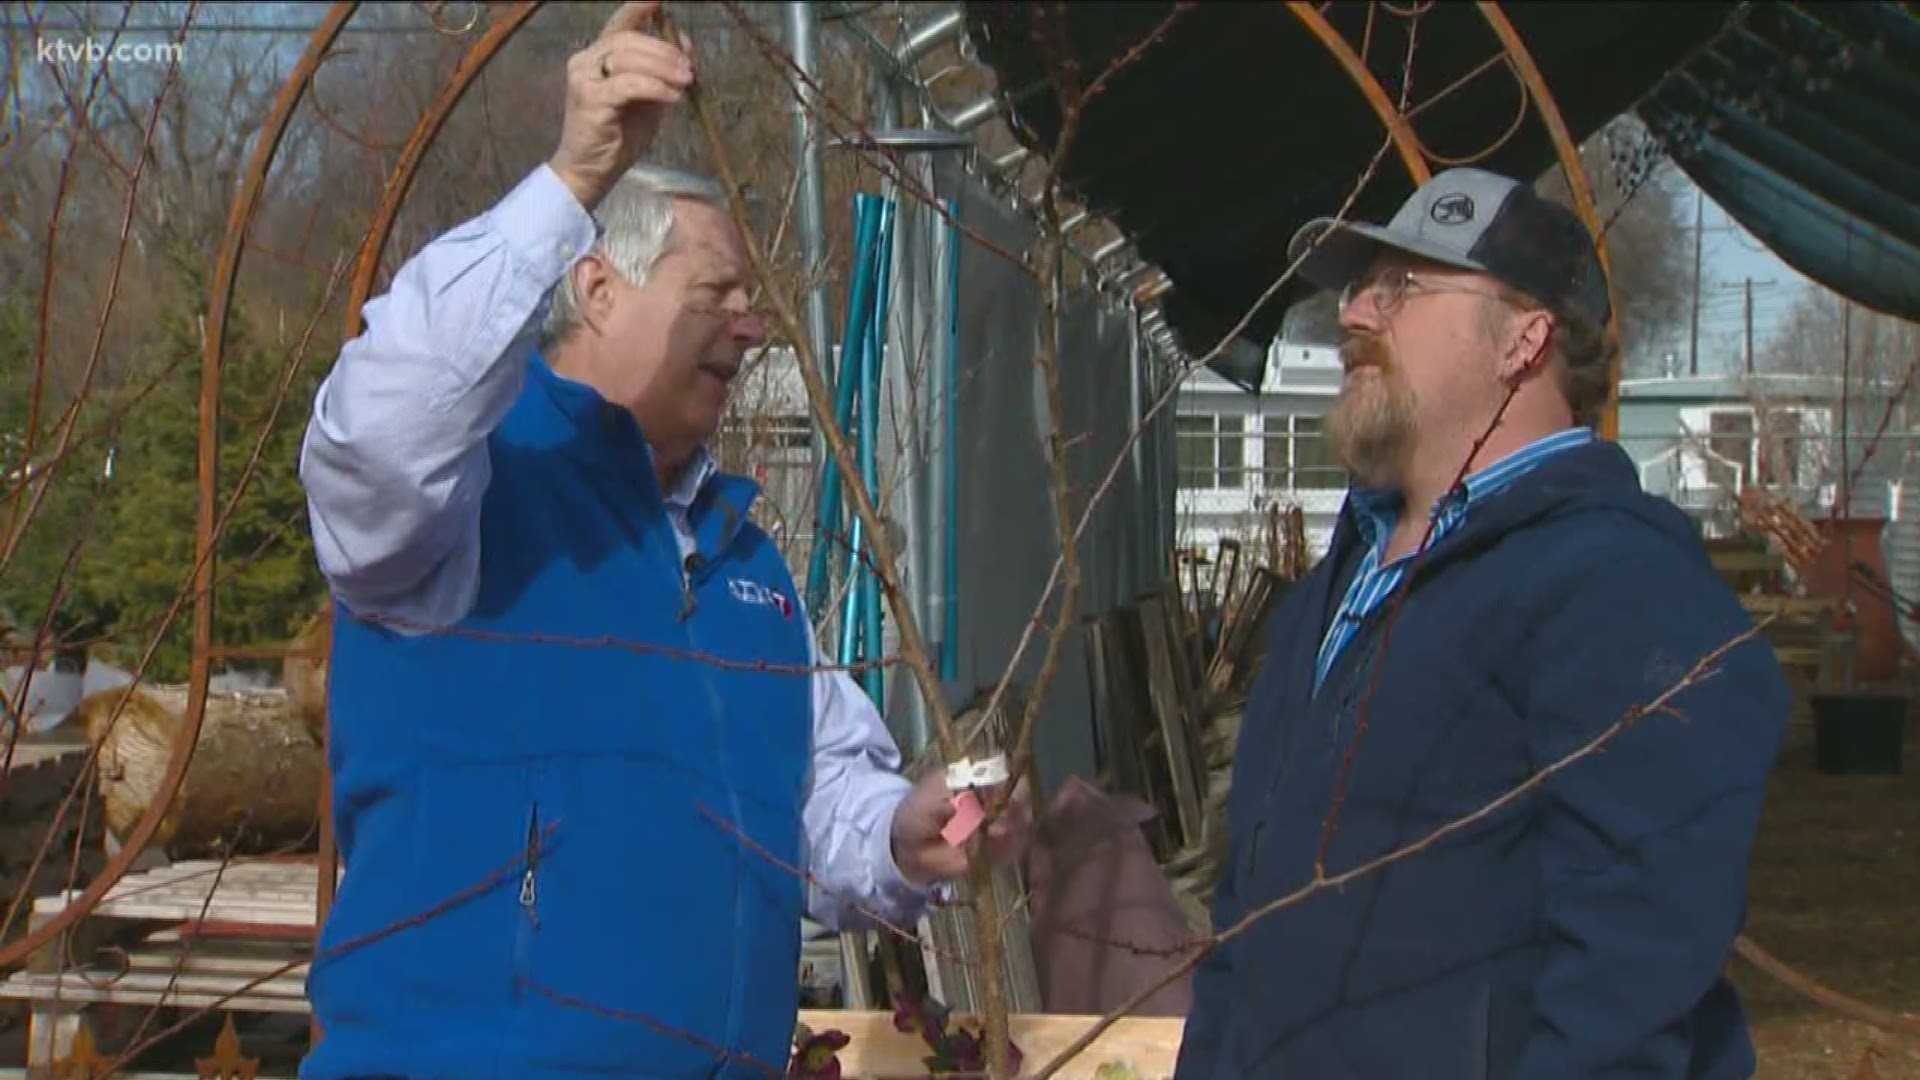 Garden master Jim Duthie talked to an expert who says now is the time to prune your trees and apply dormant oil sprays.